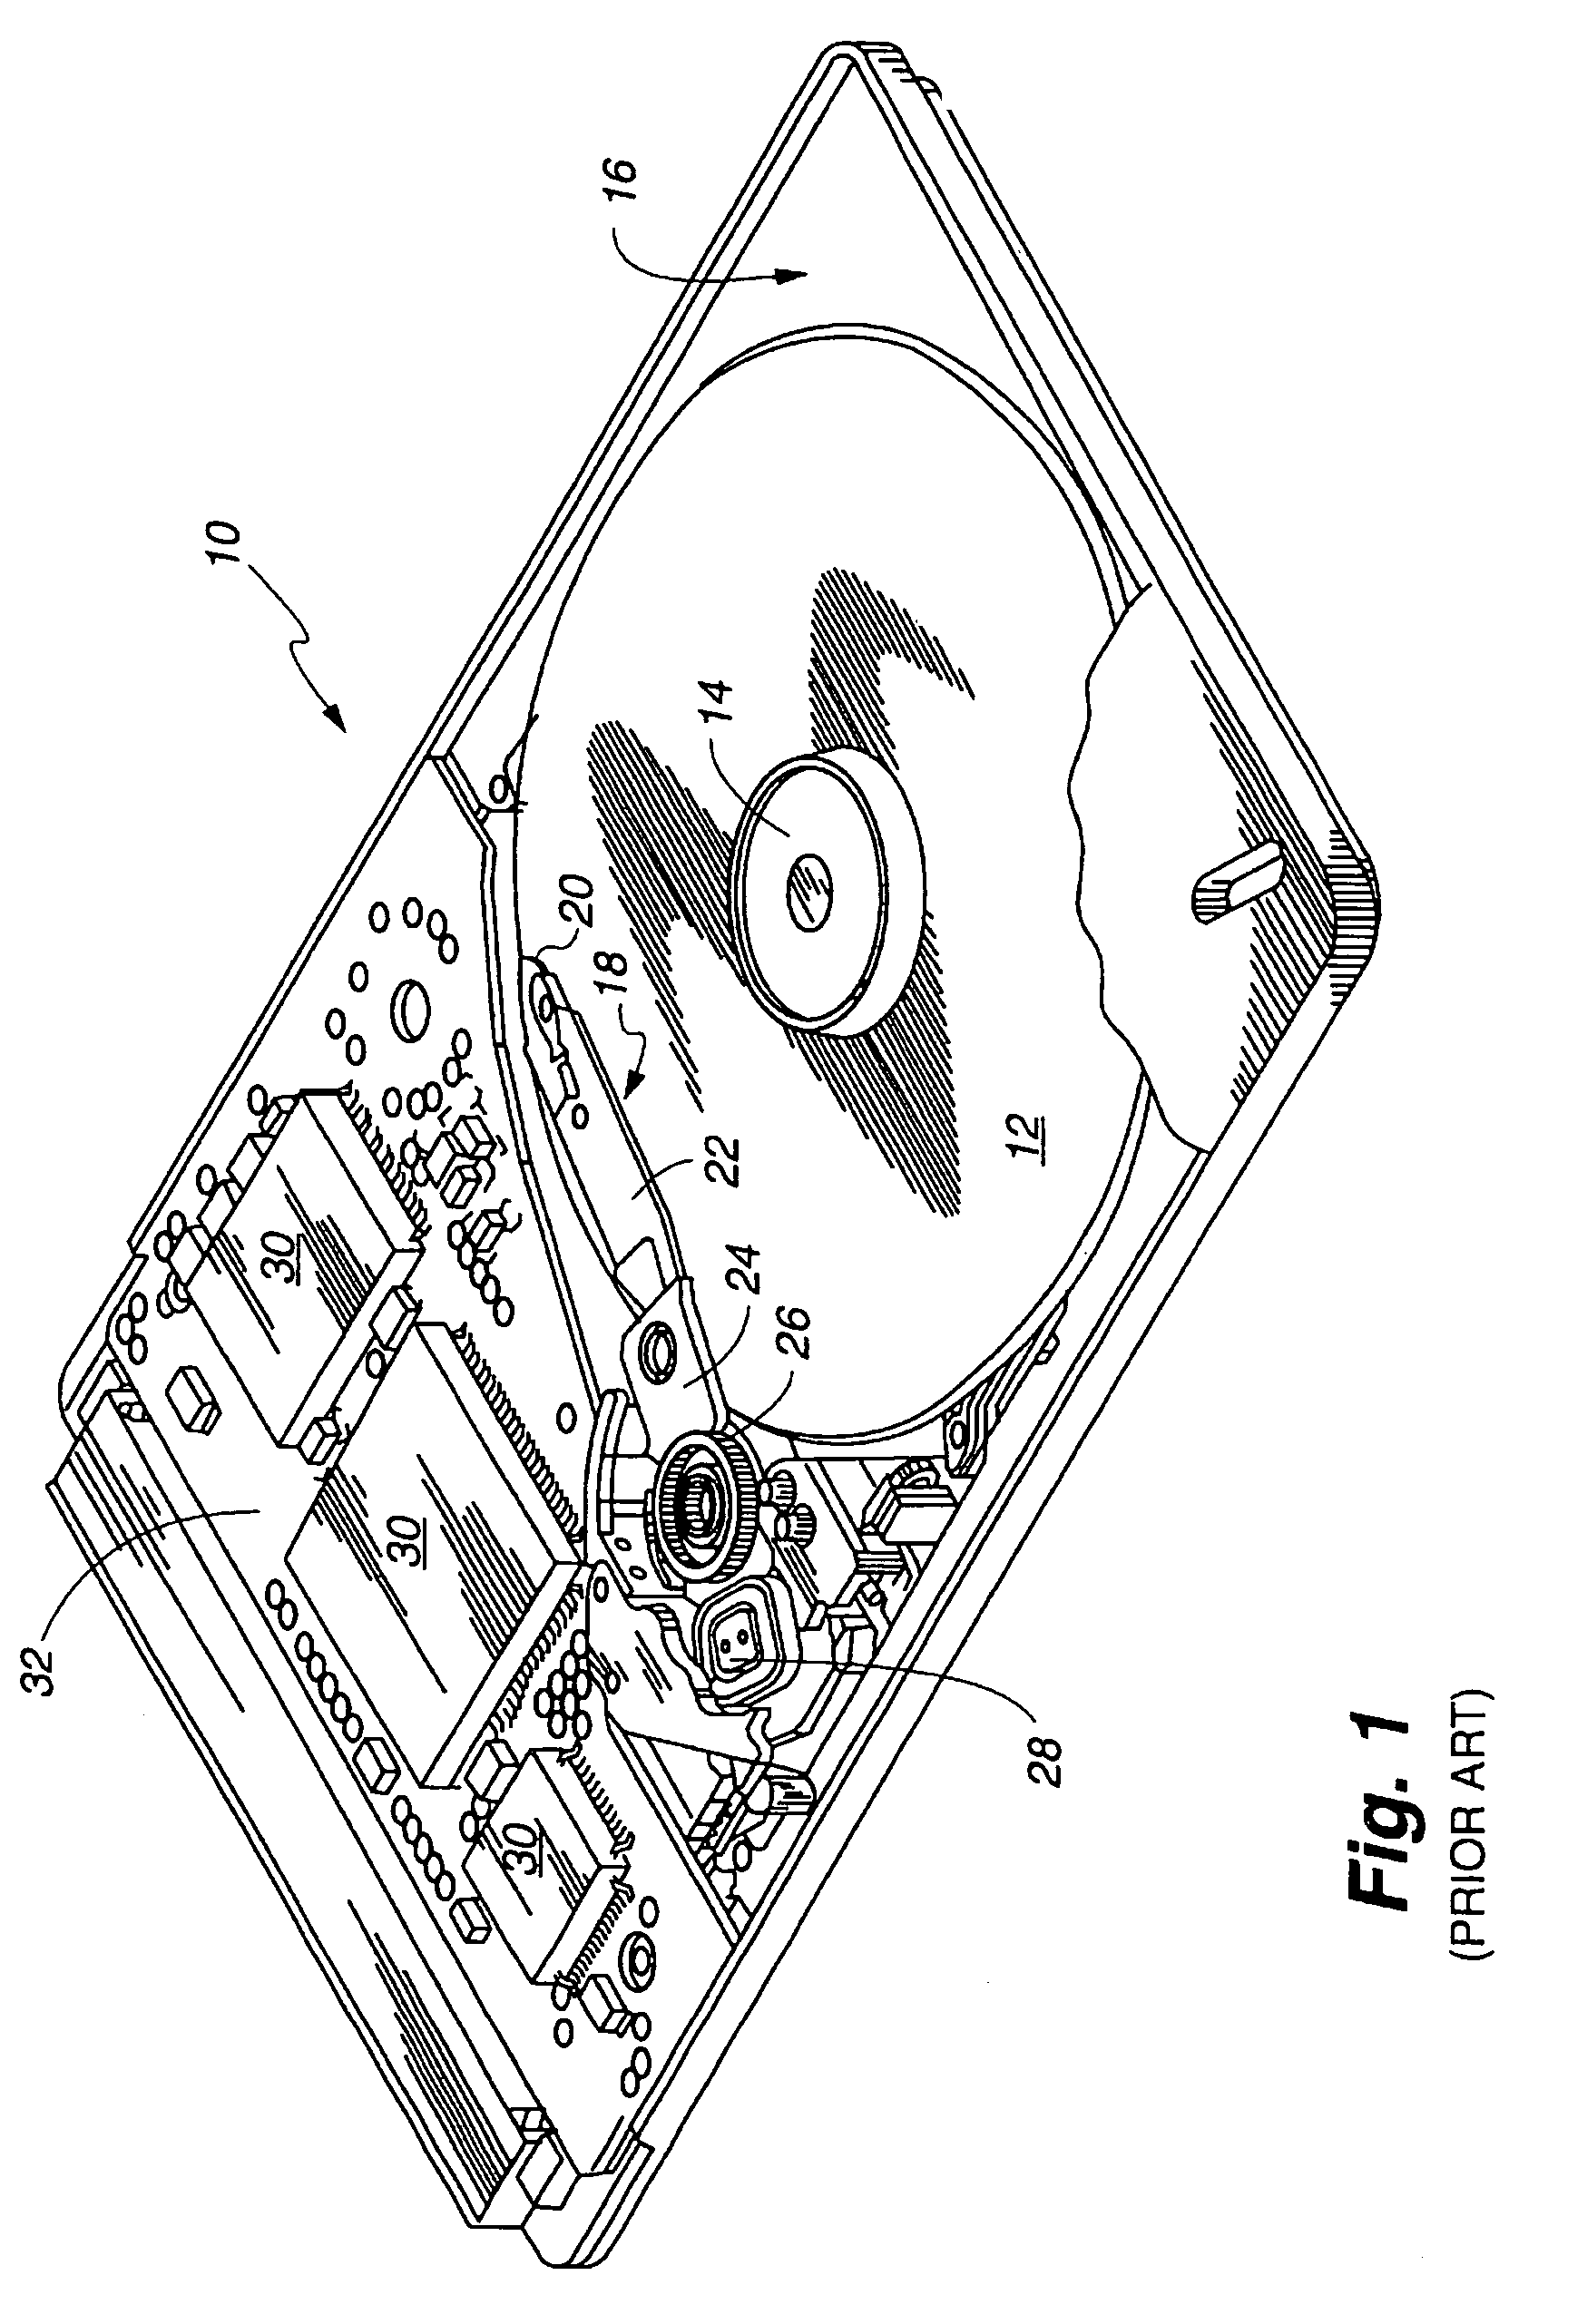 Apparatus for writing servo bursts on a disk with servo track pitch based on read element width and methods of manufacturing same